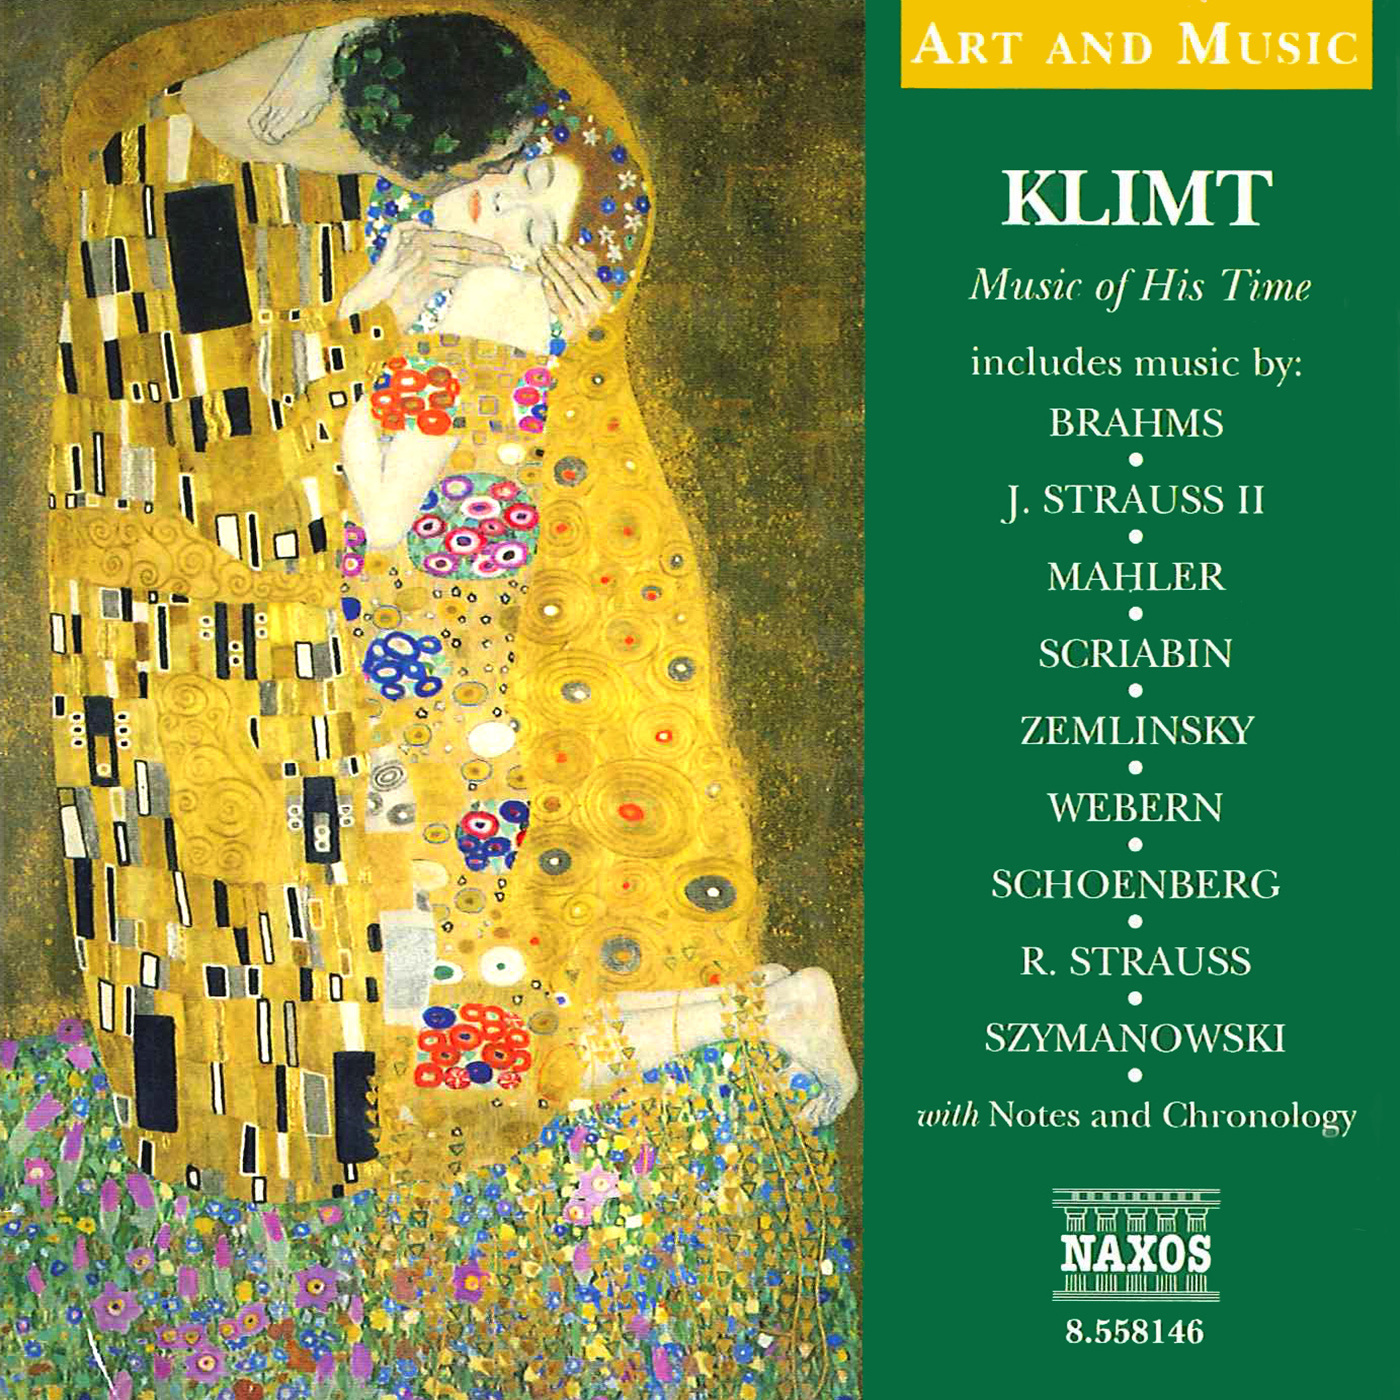 Art and Music: Klimt -  Music of His Time